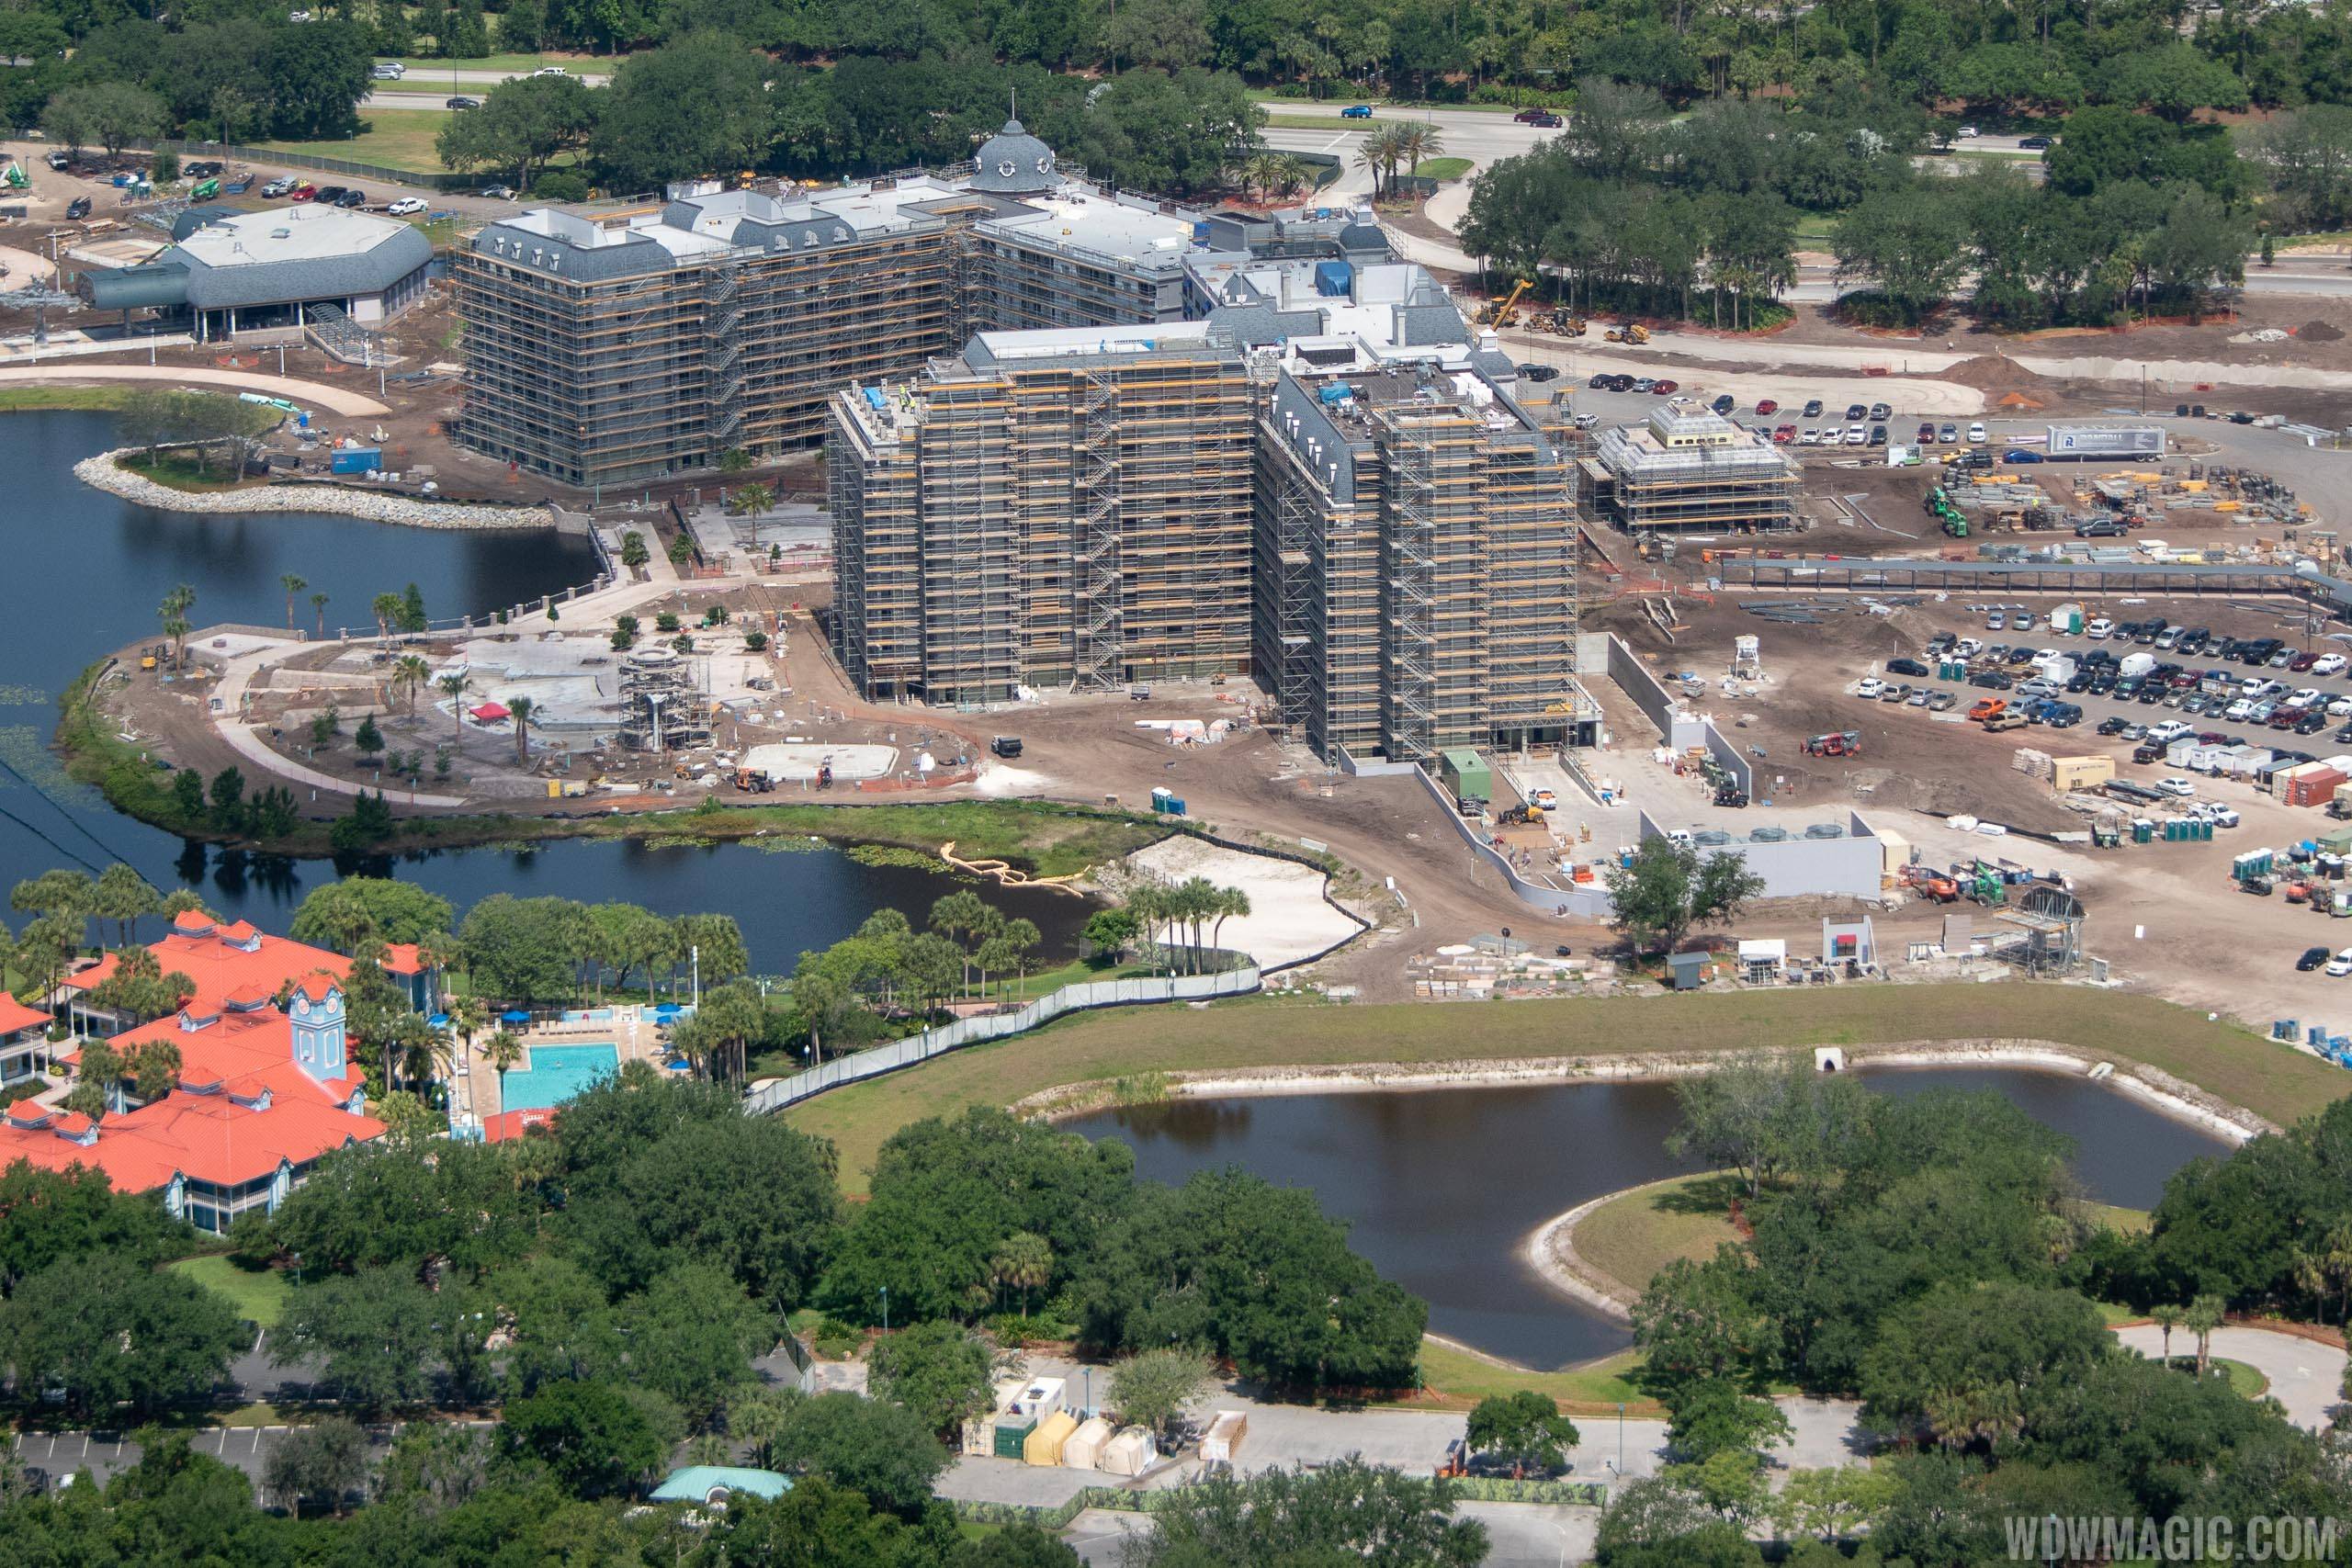 Disney Riviera construction from the air - May 2019